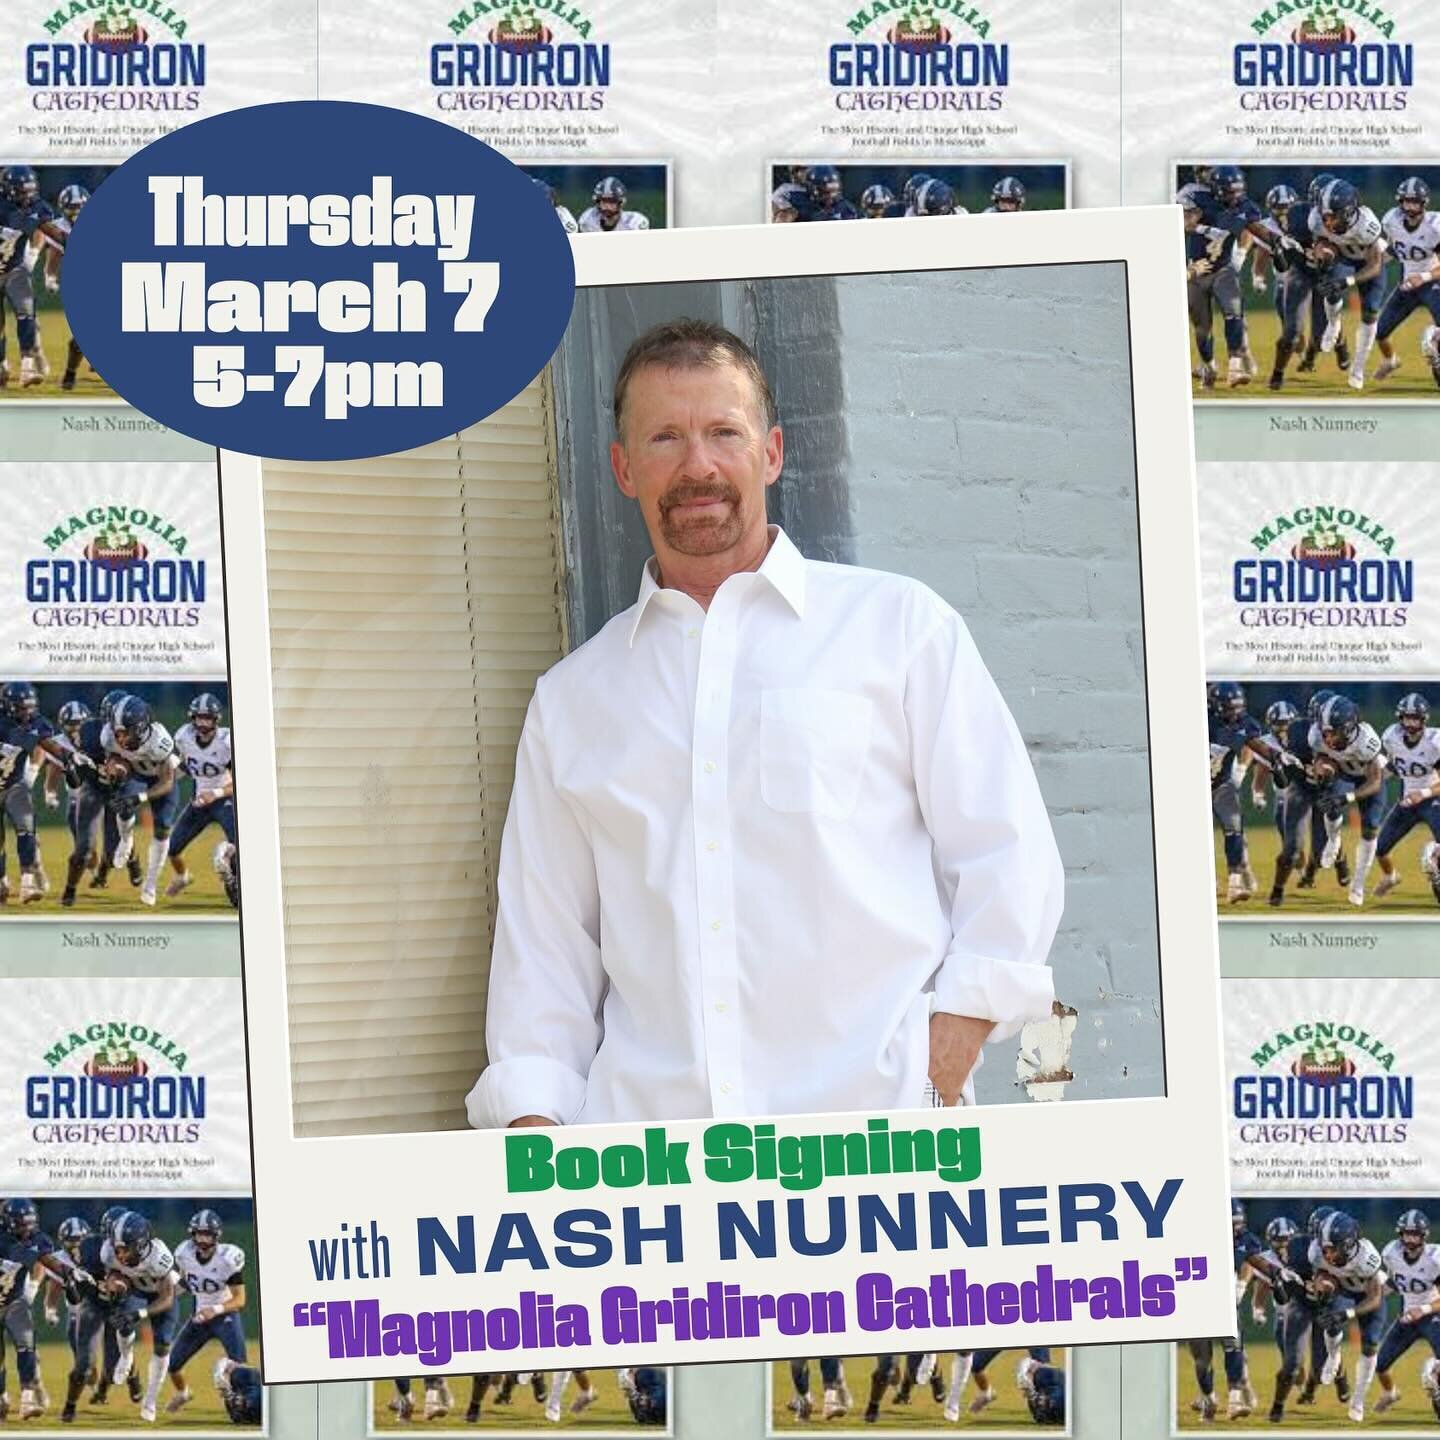 We&rsquo;ve got a great week ahead of us at #thebuzzardsroostms! Thursday night we are hosting a book signing with Mississippi author Nash Nunnery, then FREE live music on Friday and Saturday nights from Shelby Anderson and Eric Woods!